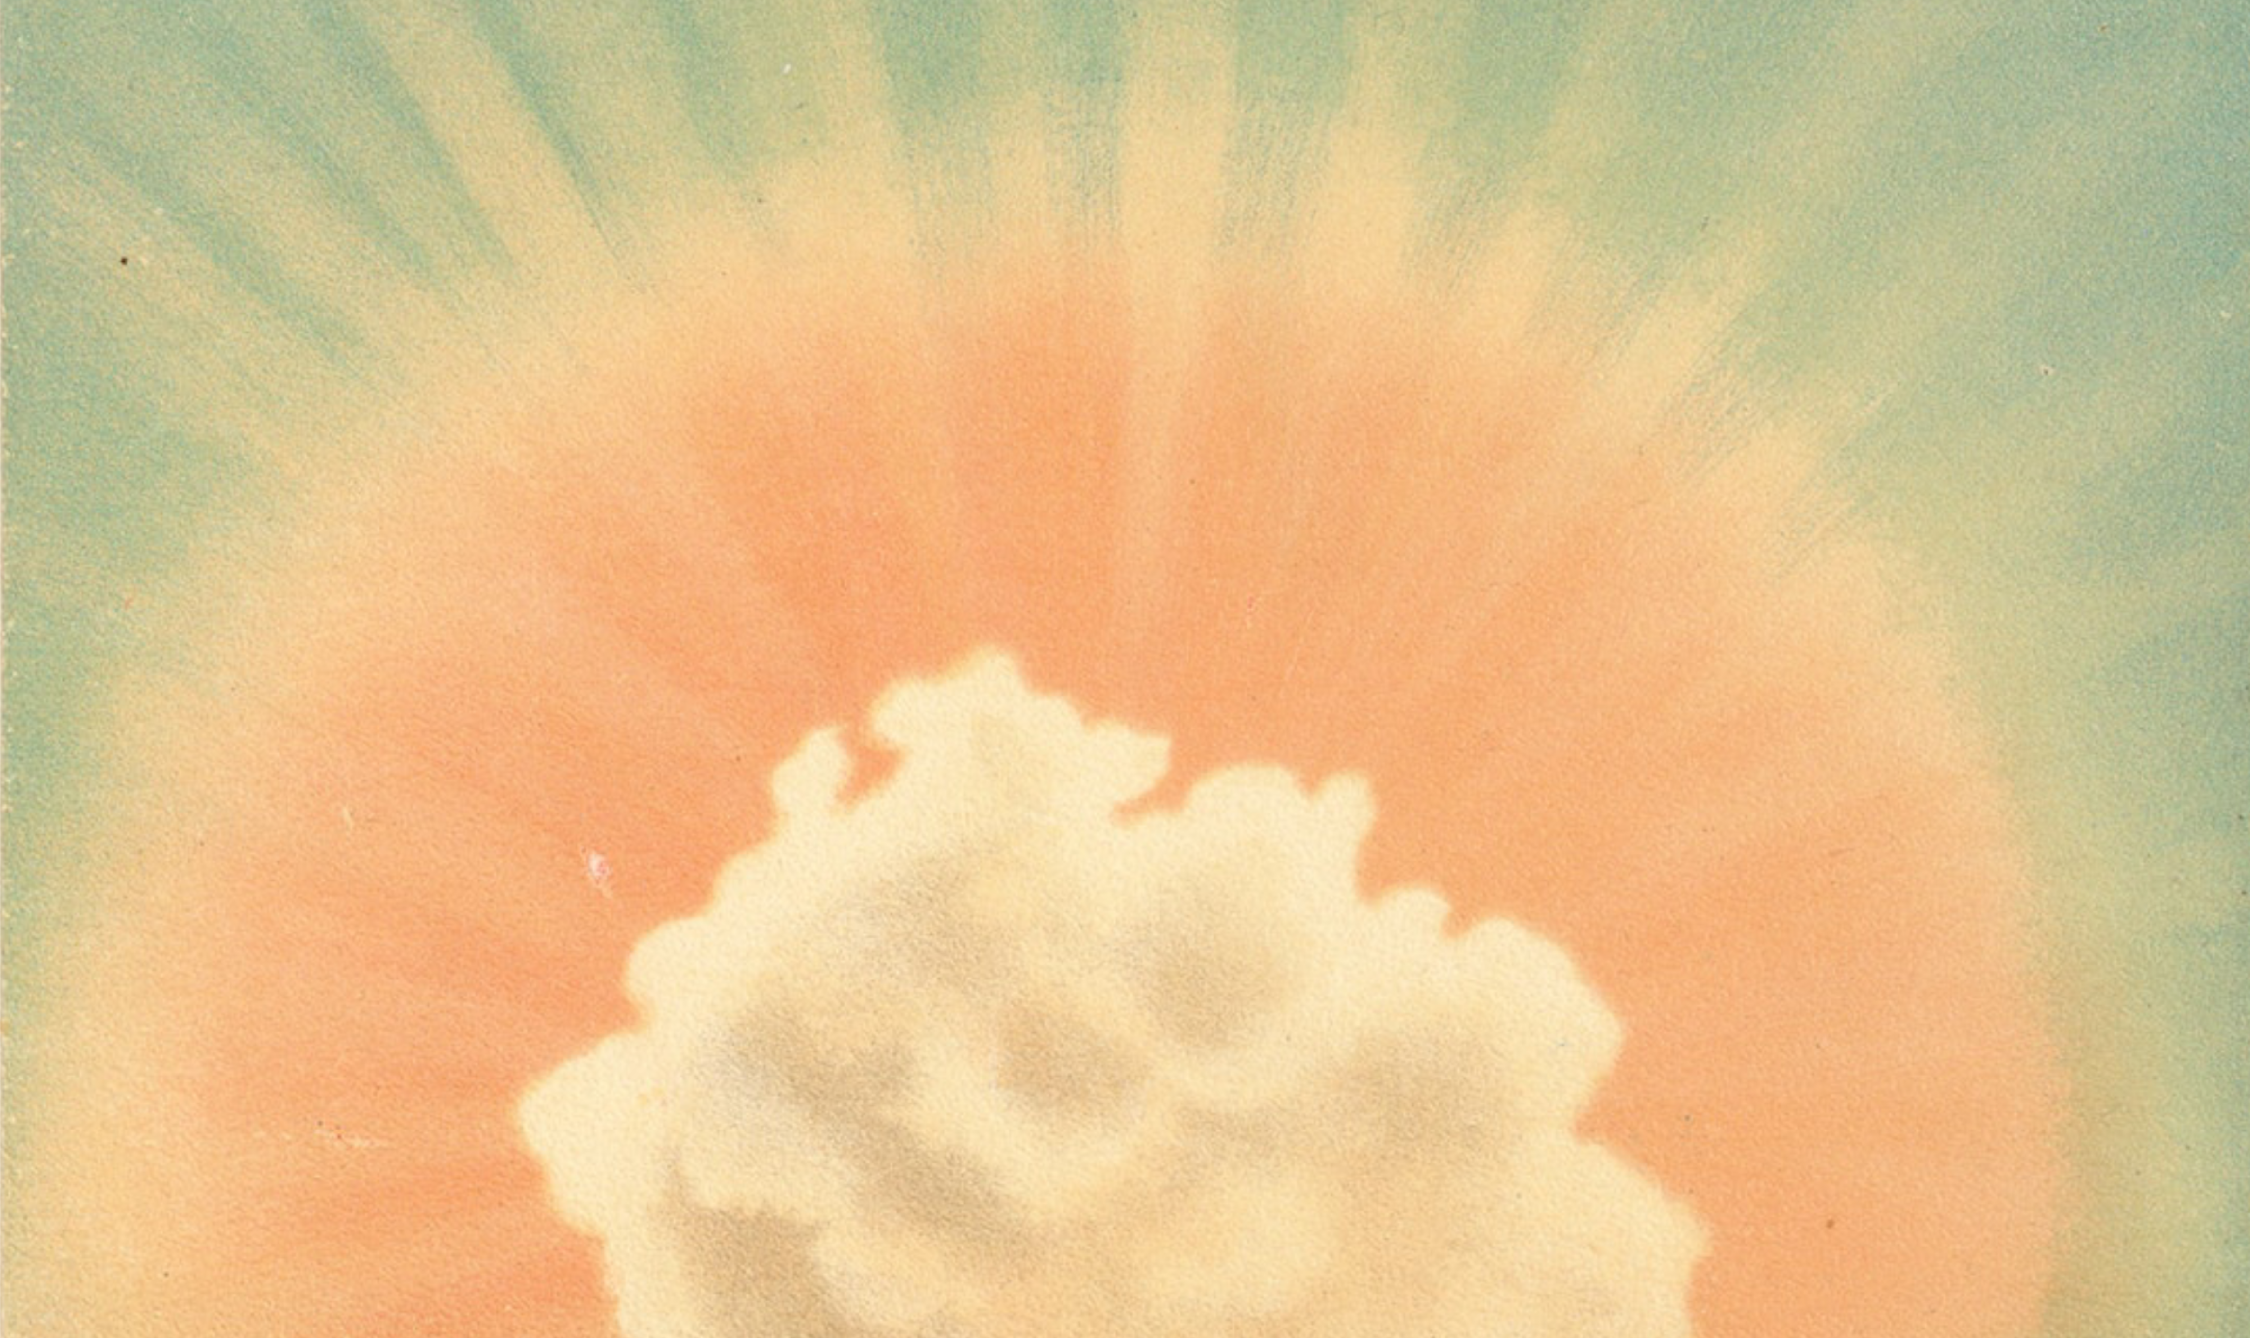 A lithograph of a watercolor painting of an exploding cloud surrounded by a ring of red-orange light, and a blue-gray sky beyond it.